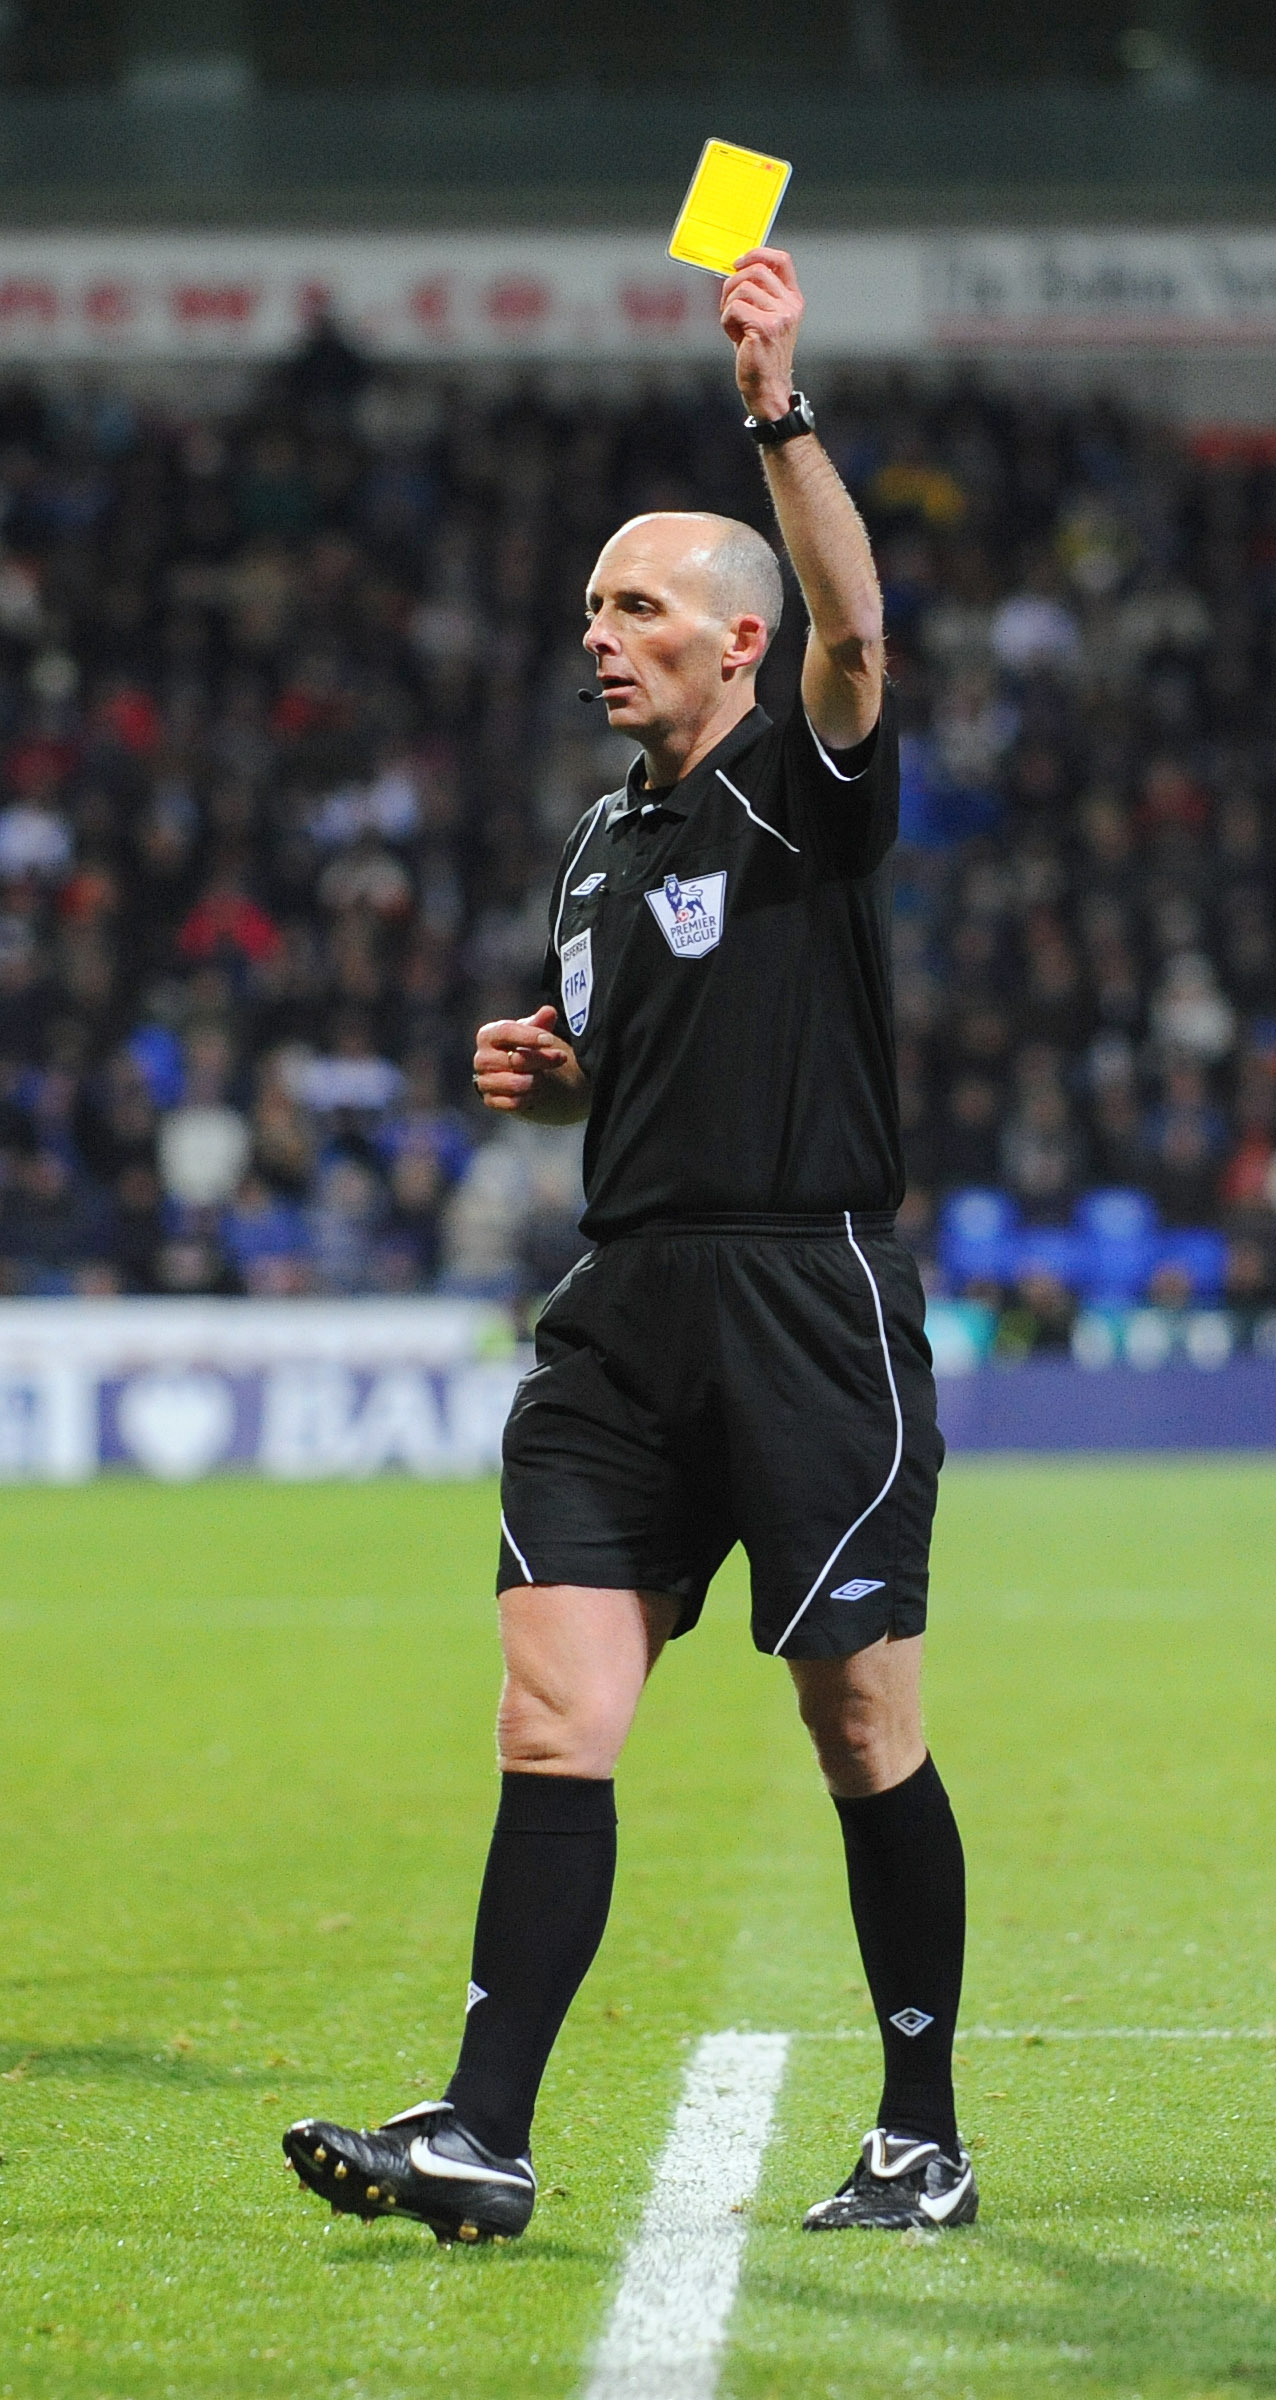 BOLTON, UNITED KINGDOM - NOVEMBER 27: Match referee Mike Dean during the Barclays Premier League match between Bolton Wanderers and Blackpool at the Reebok Stadium on November 27, 2010 in Bolton, England. (Photo by Clint Hughes/Getty Images)